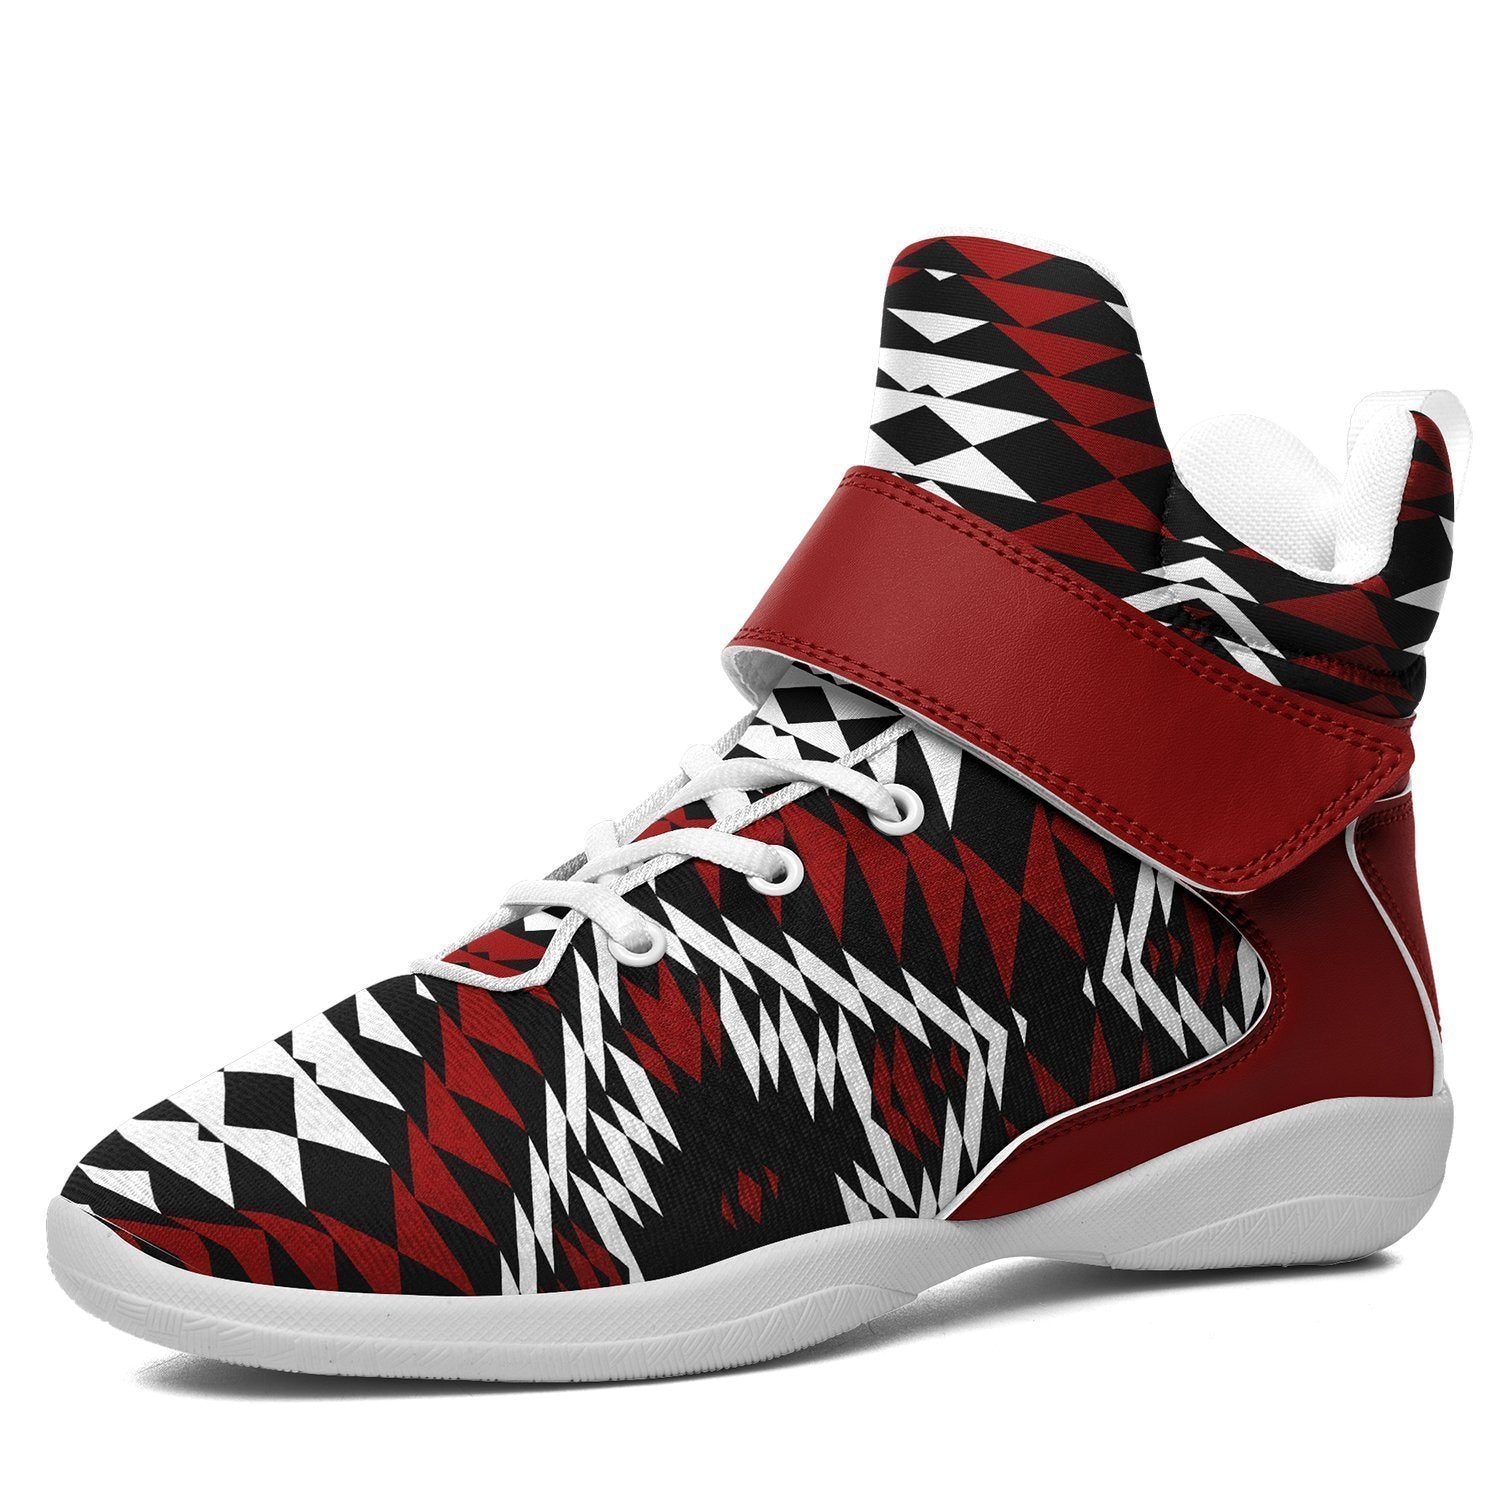 Taos Wool Kid's Ipottaa Basketball / Sport High Top Shoes 49 Dzine US Child 12.5 / EUR 30 White Sole with Dark Red Strap 